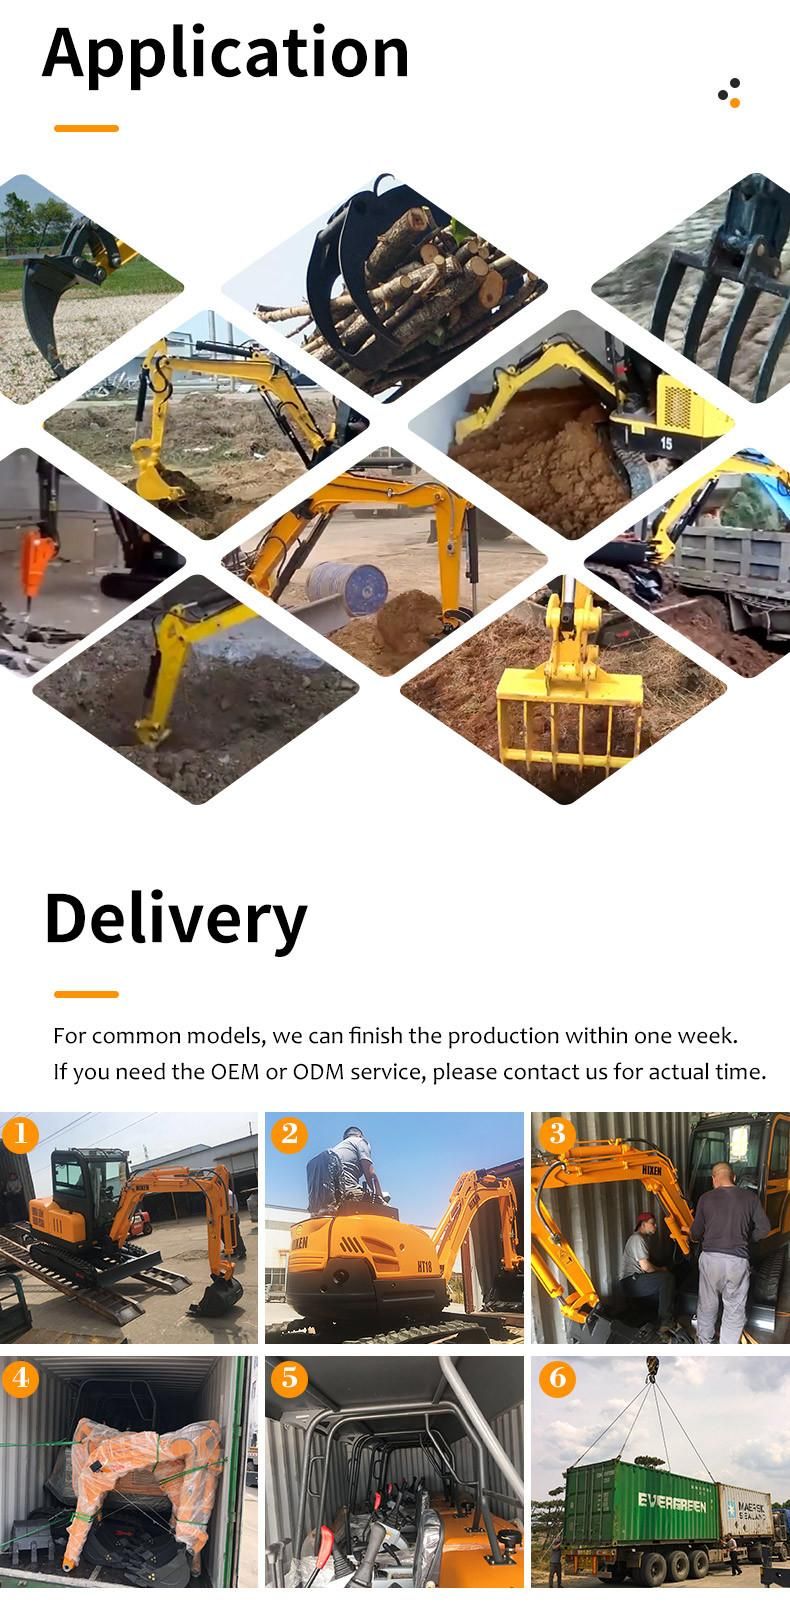 China 3 Ton Mini Digger with CE Attached Tools Such as Hammer Auger Hot Sale